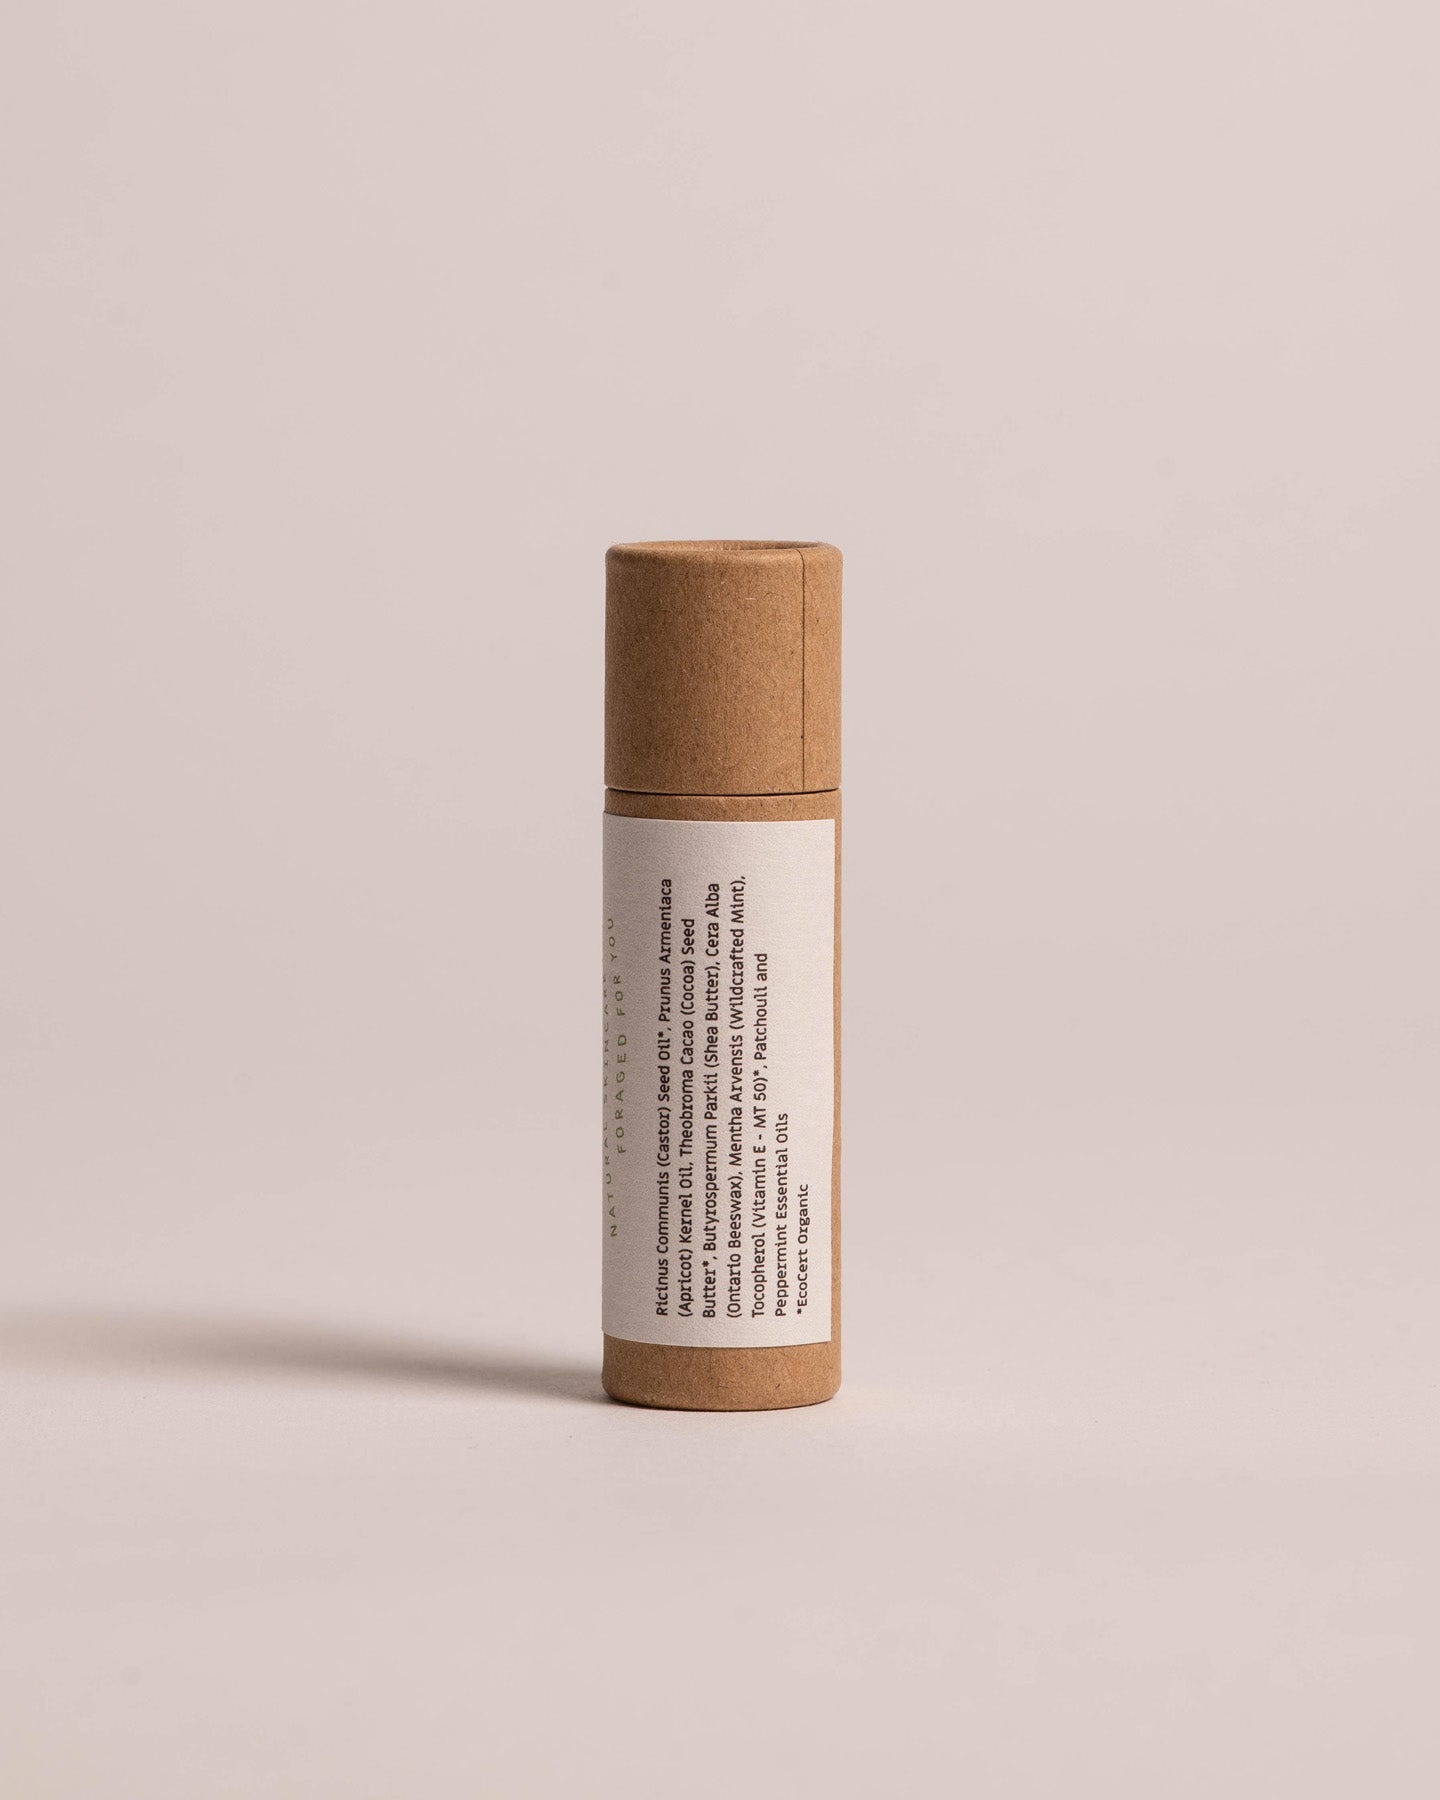 Patchouli Mint Lip Butter | The Cedar Nook in a kraft compostable tube back view showing white label with list of ingredients and directions for use